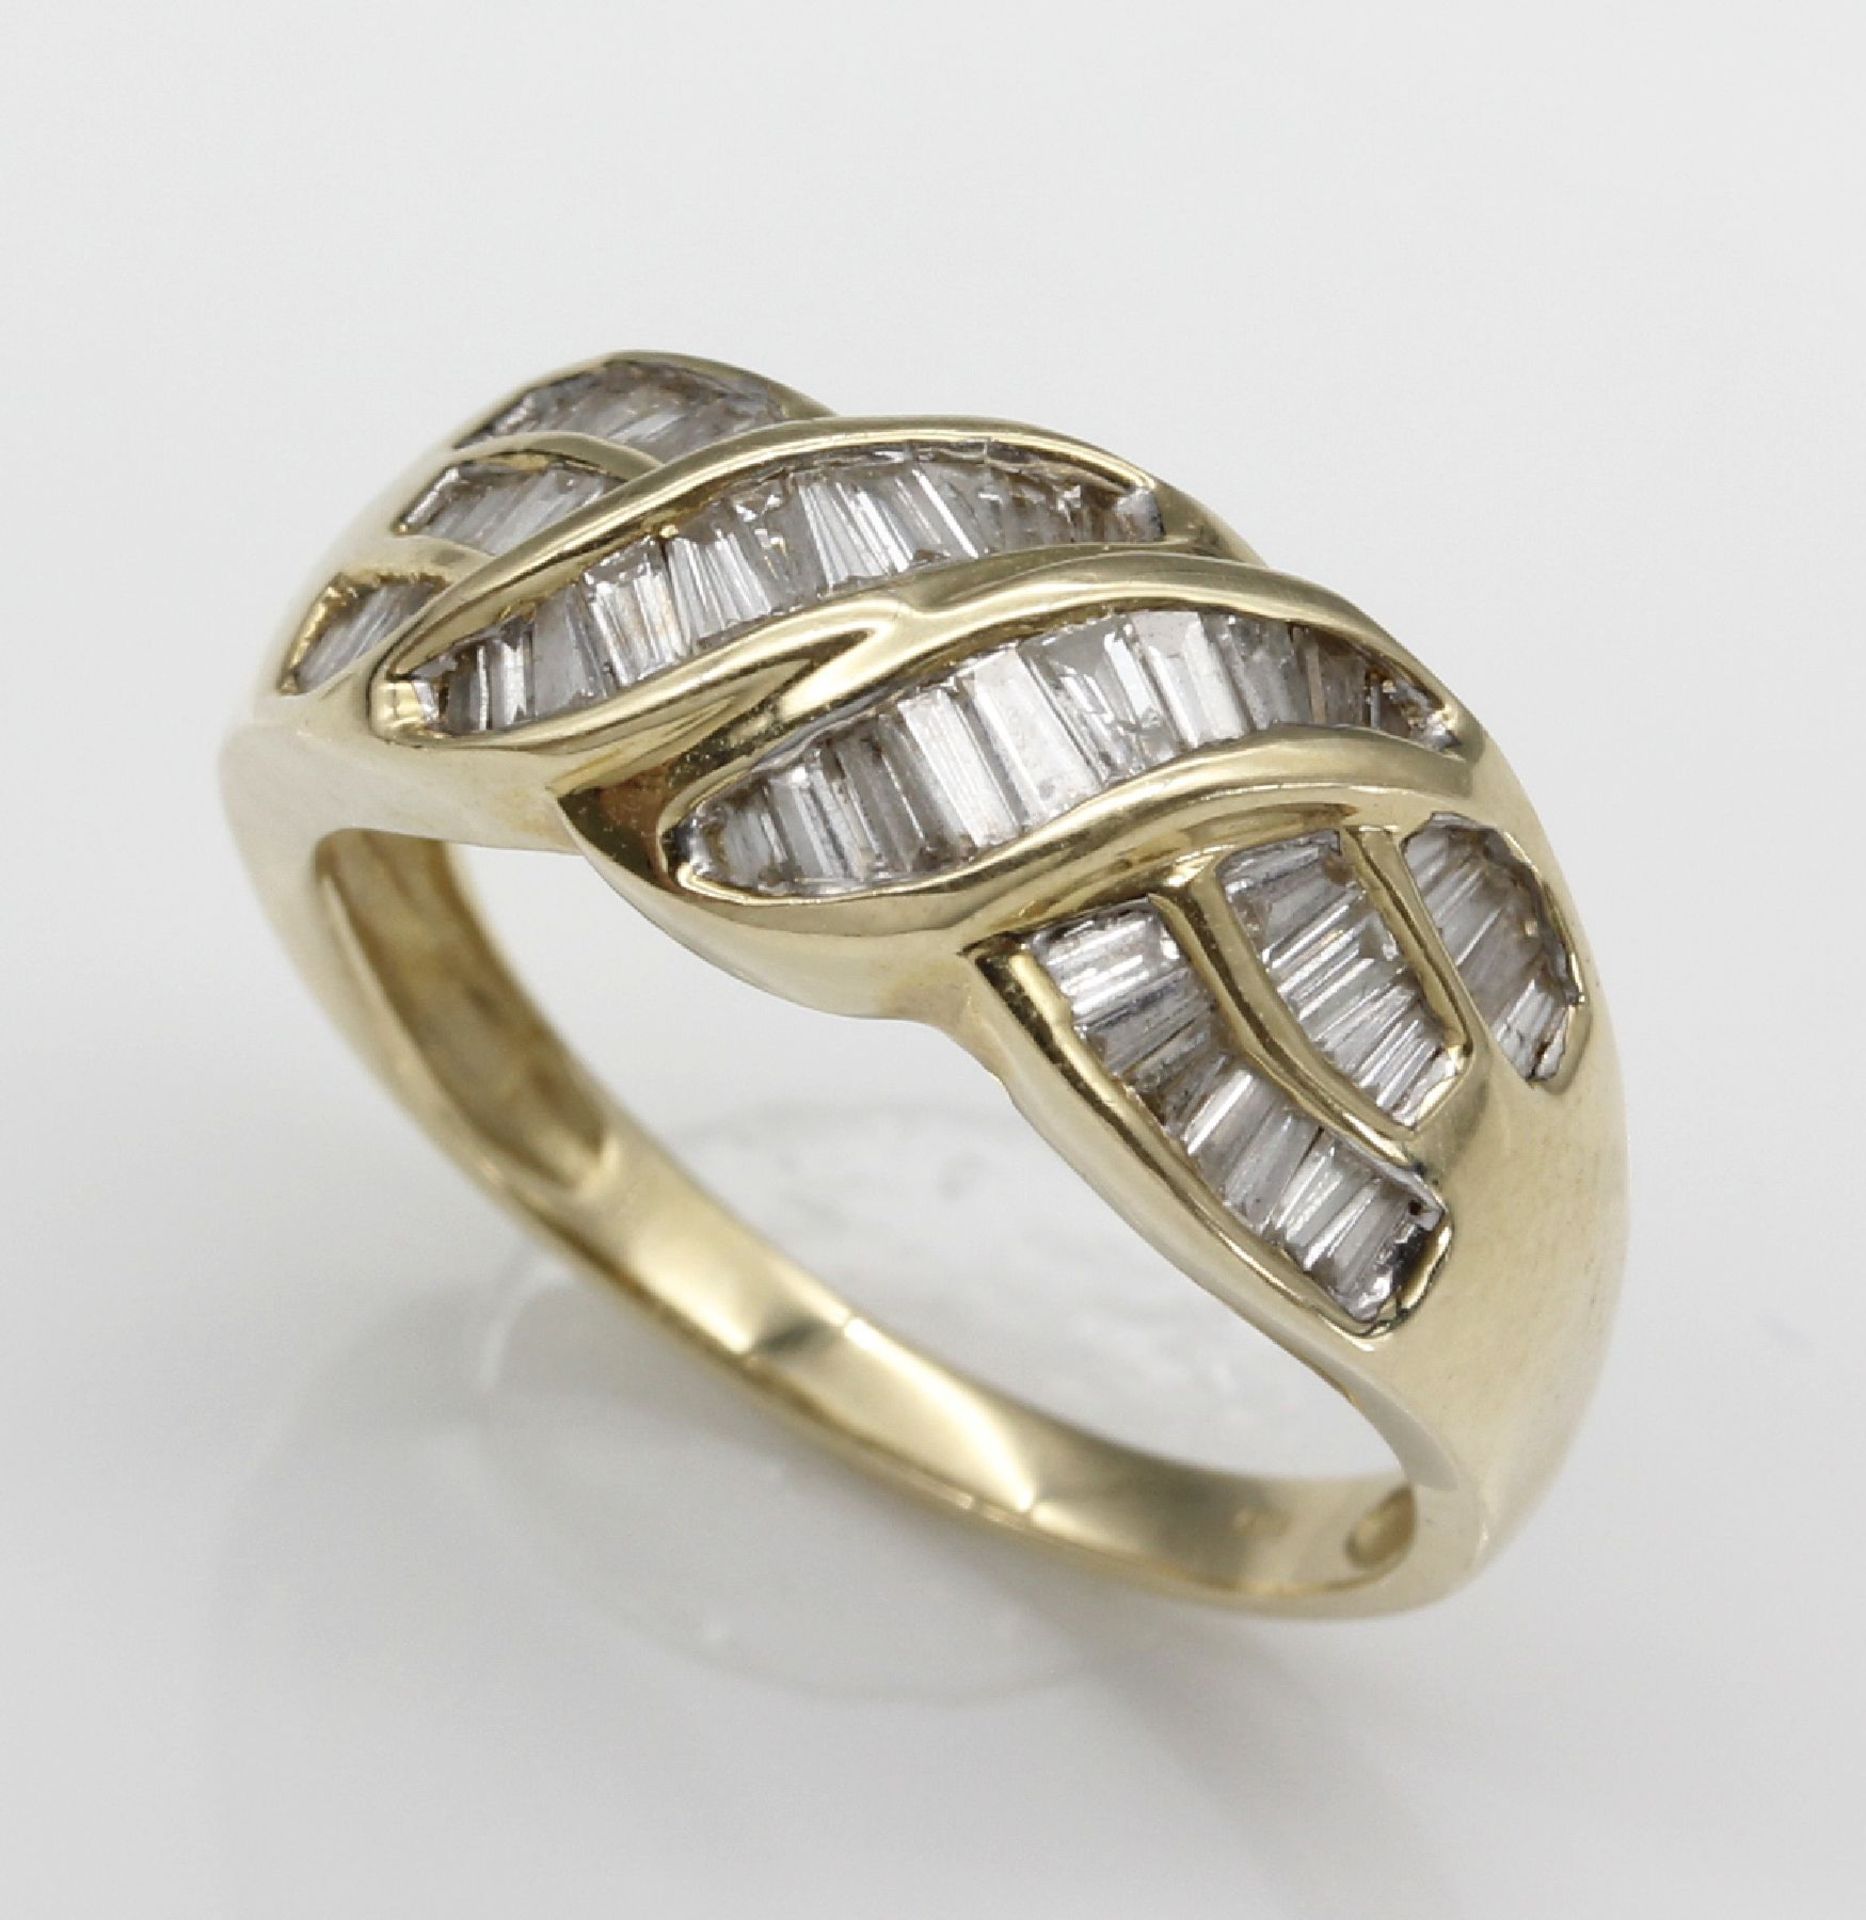 14 kt Gold Diamant-Ring, GG 585/000, 52 Diamantbaguettes - Image 2 of 4